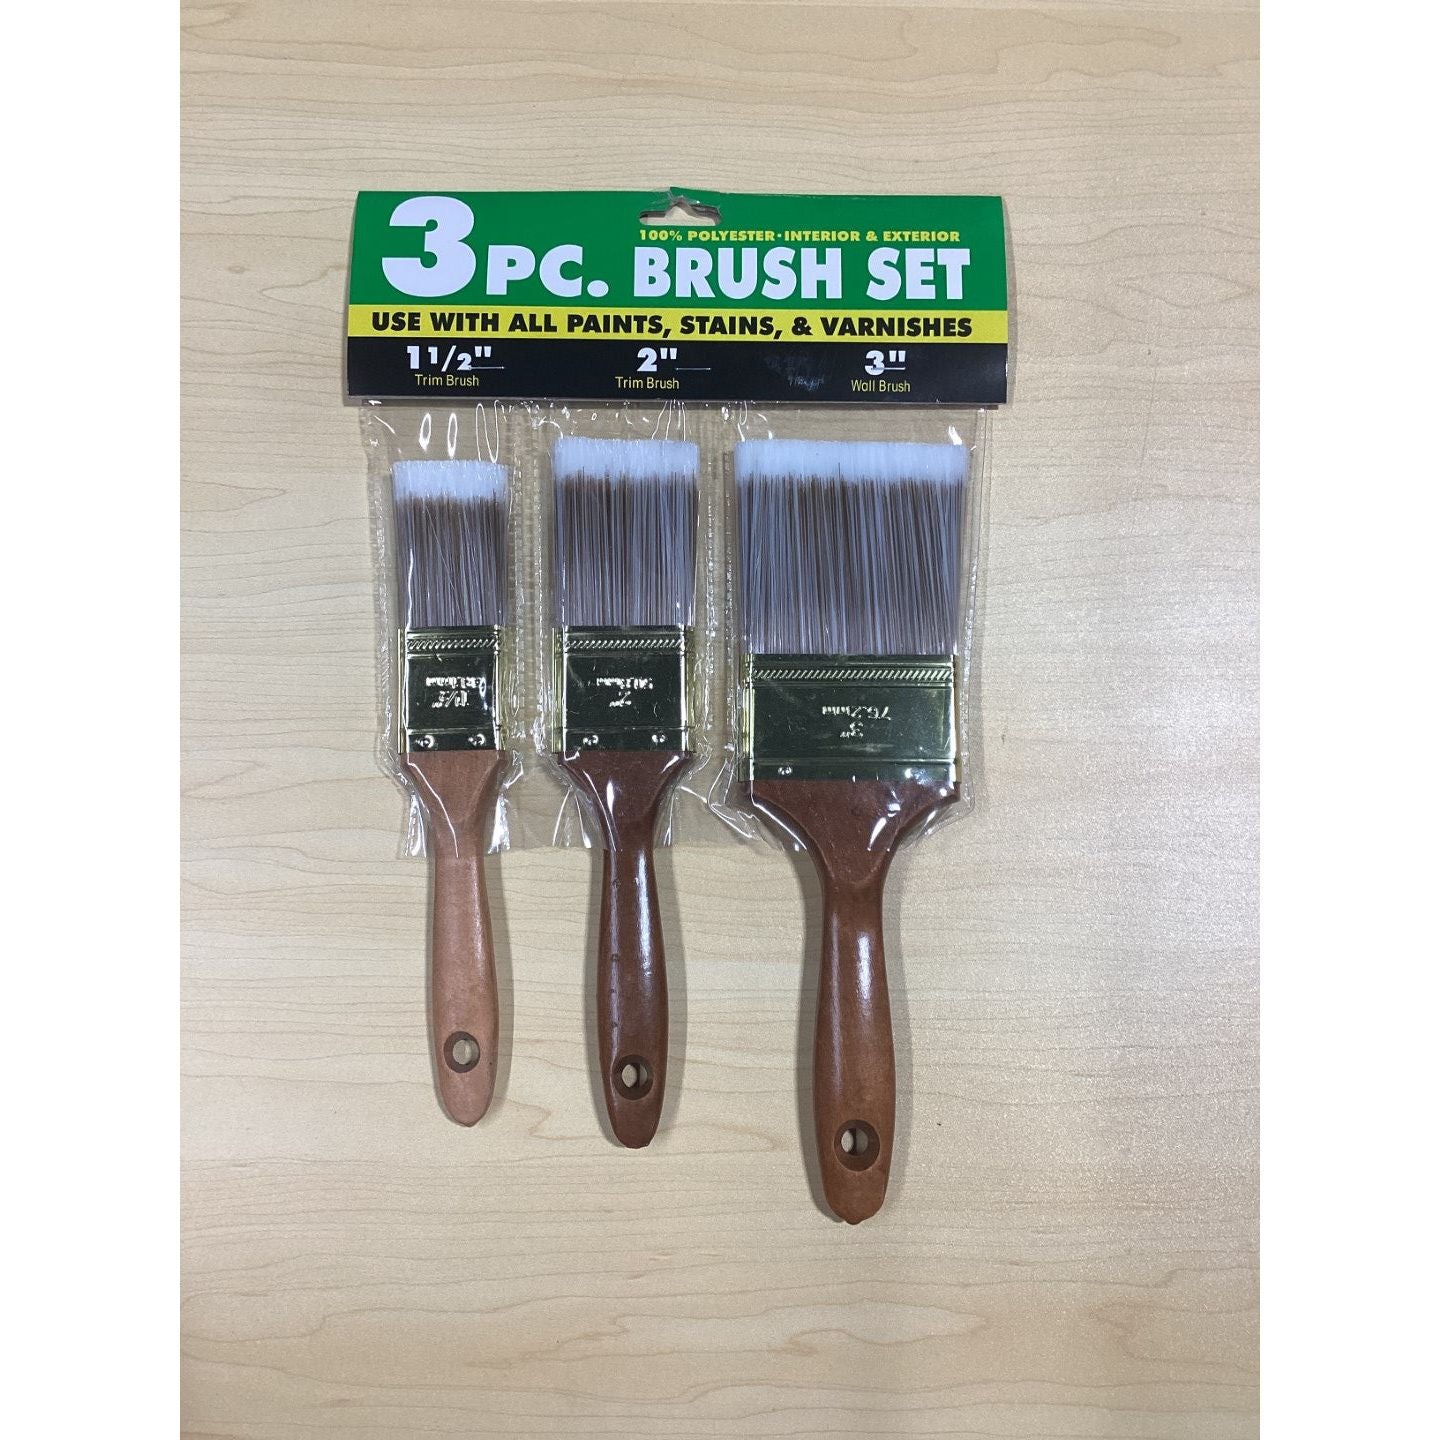 3 piece brush set 1.5 inch, 2 inch, and 3 inch brushes included